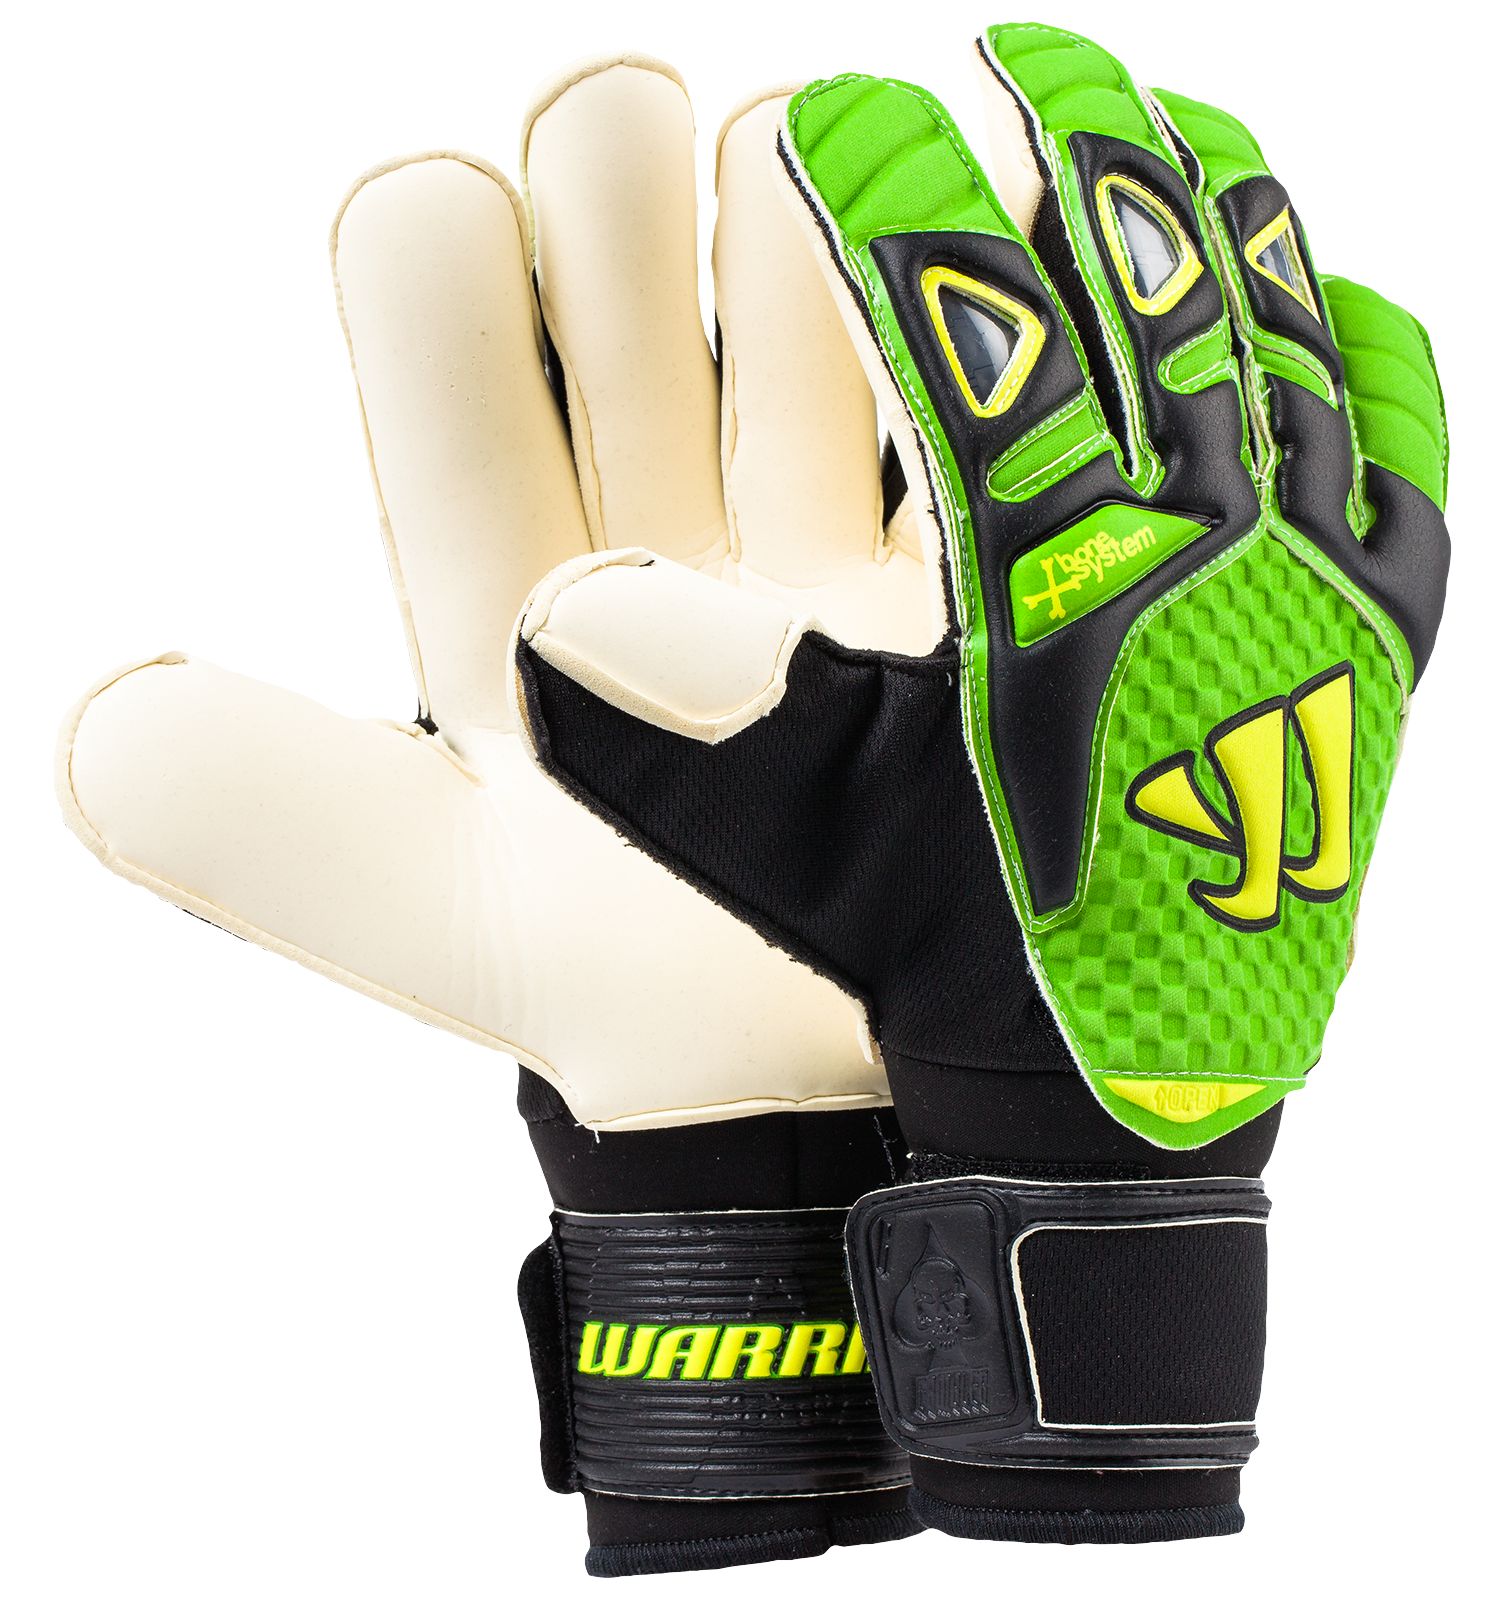 Gambler Pro Bone System Goalkeeper Glove, Black with Jazz Green & High Visibility Yellow image number 0